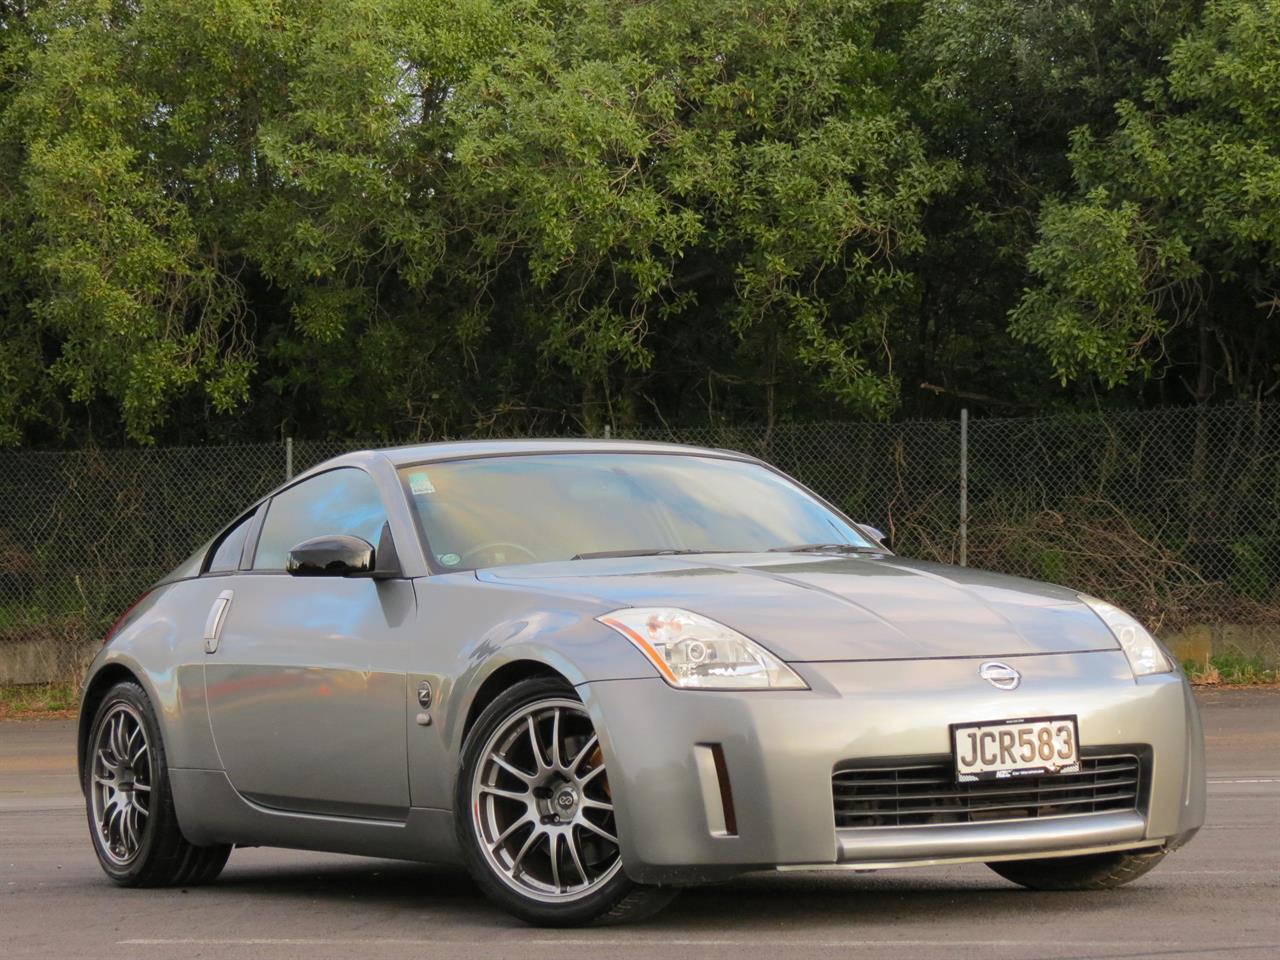 NZC 2005 Nissan FAIRLADY just arrived to Auckland